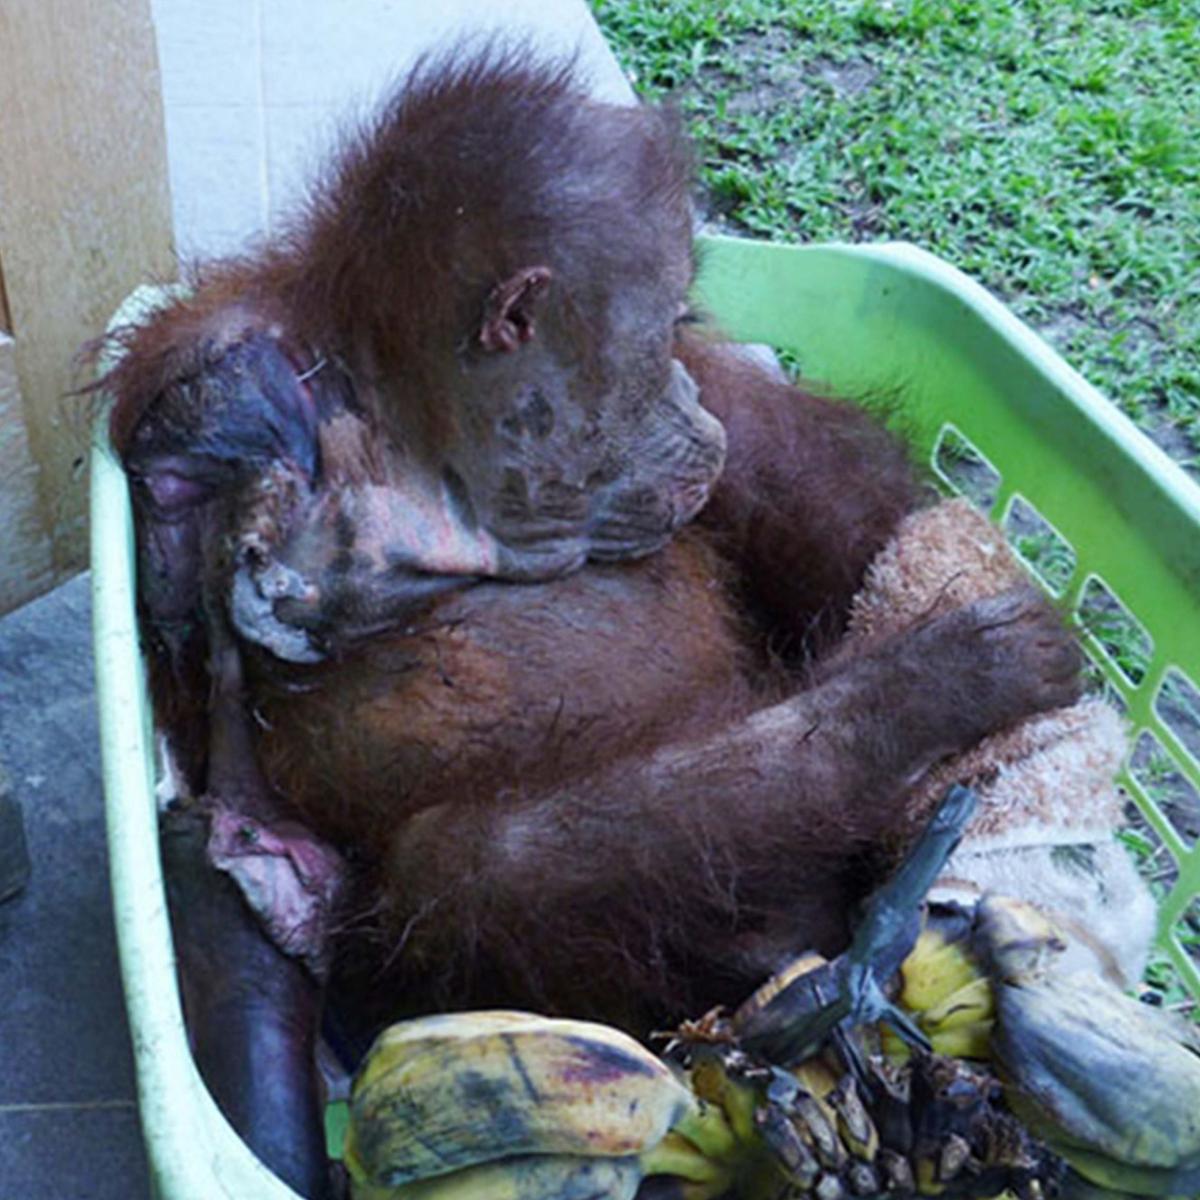 Kopral when he arrived at the sanctuary as a baby (Caters News)